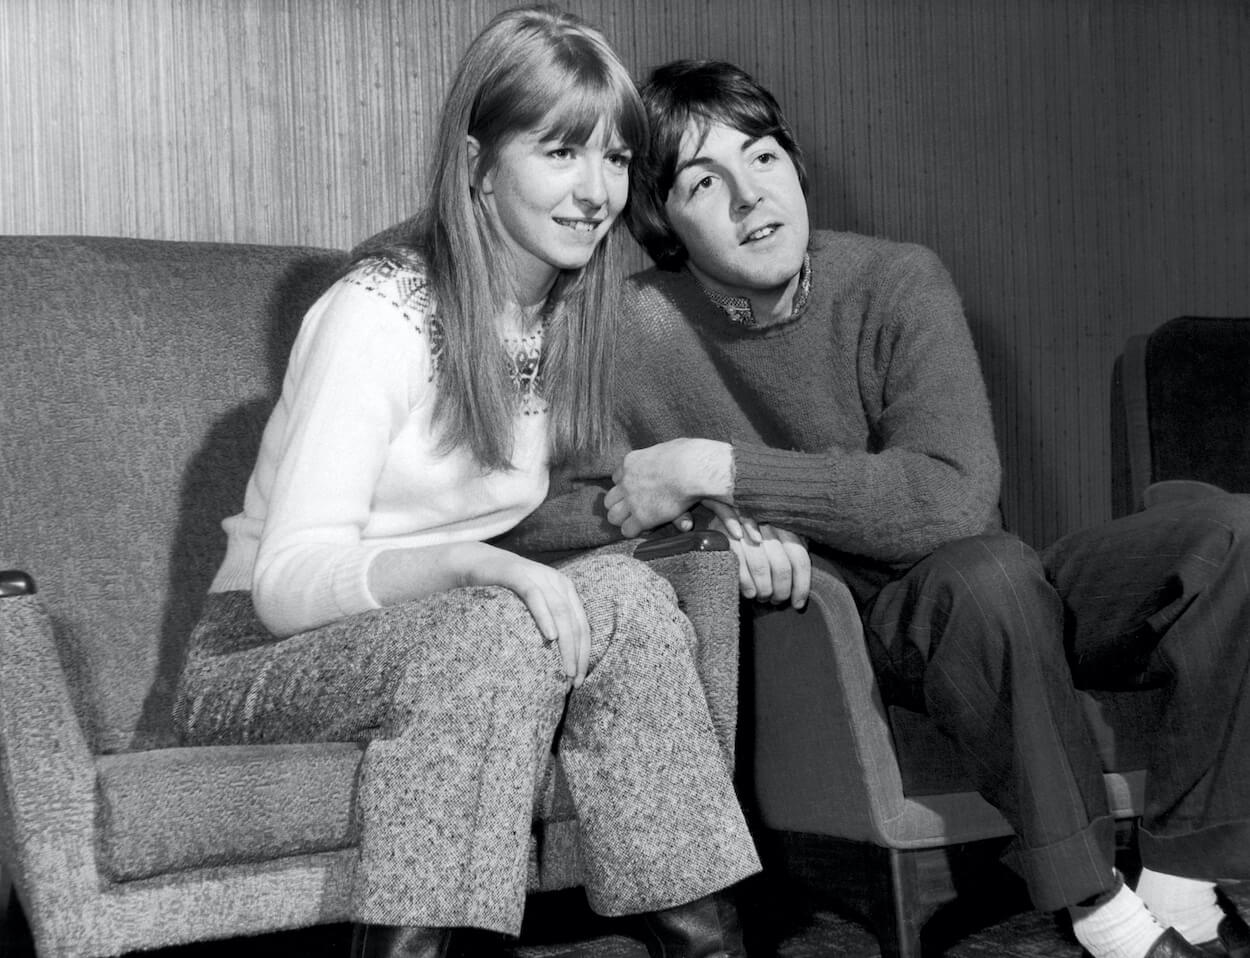 Jane Asher (left) and Paul McCartney sit in chairs at a hotel in Scotland in December 1967.